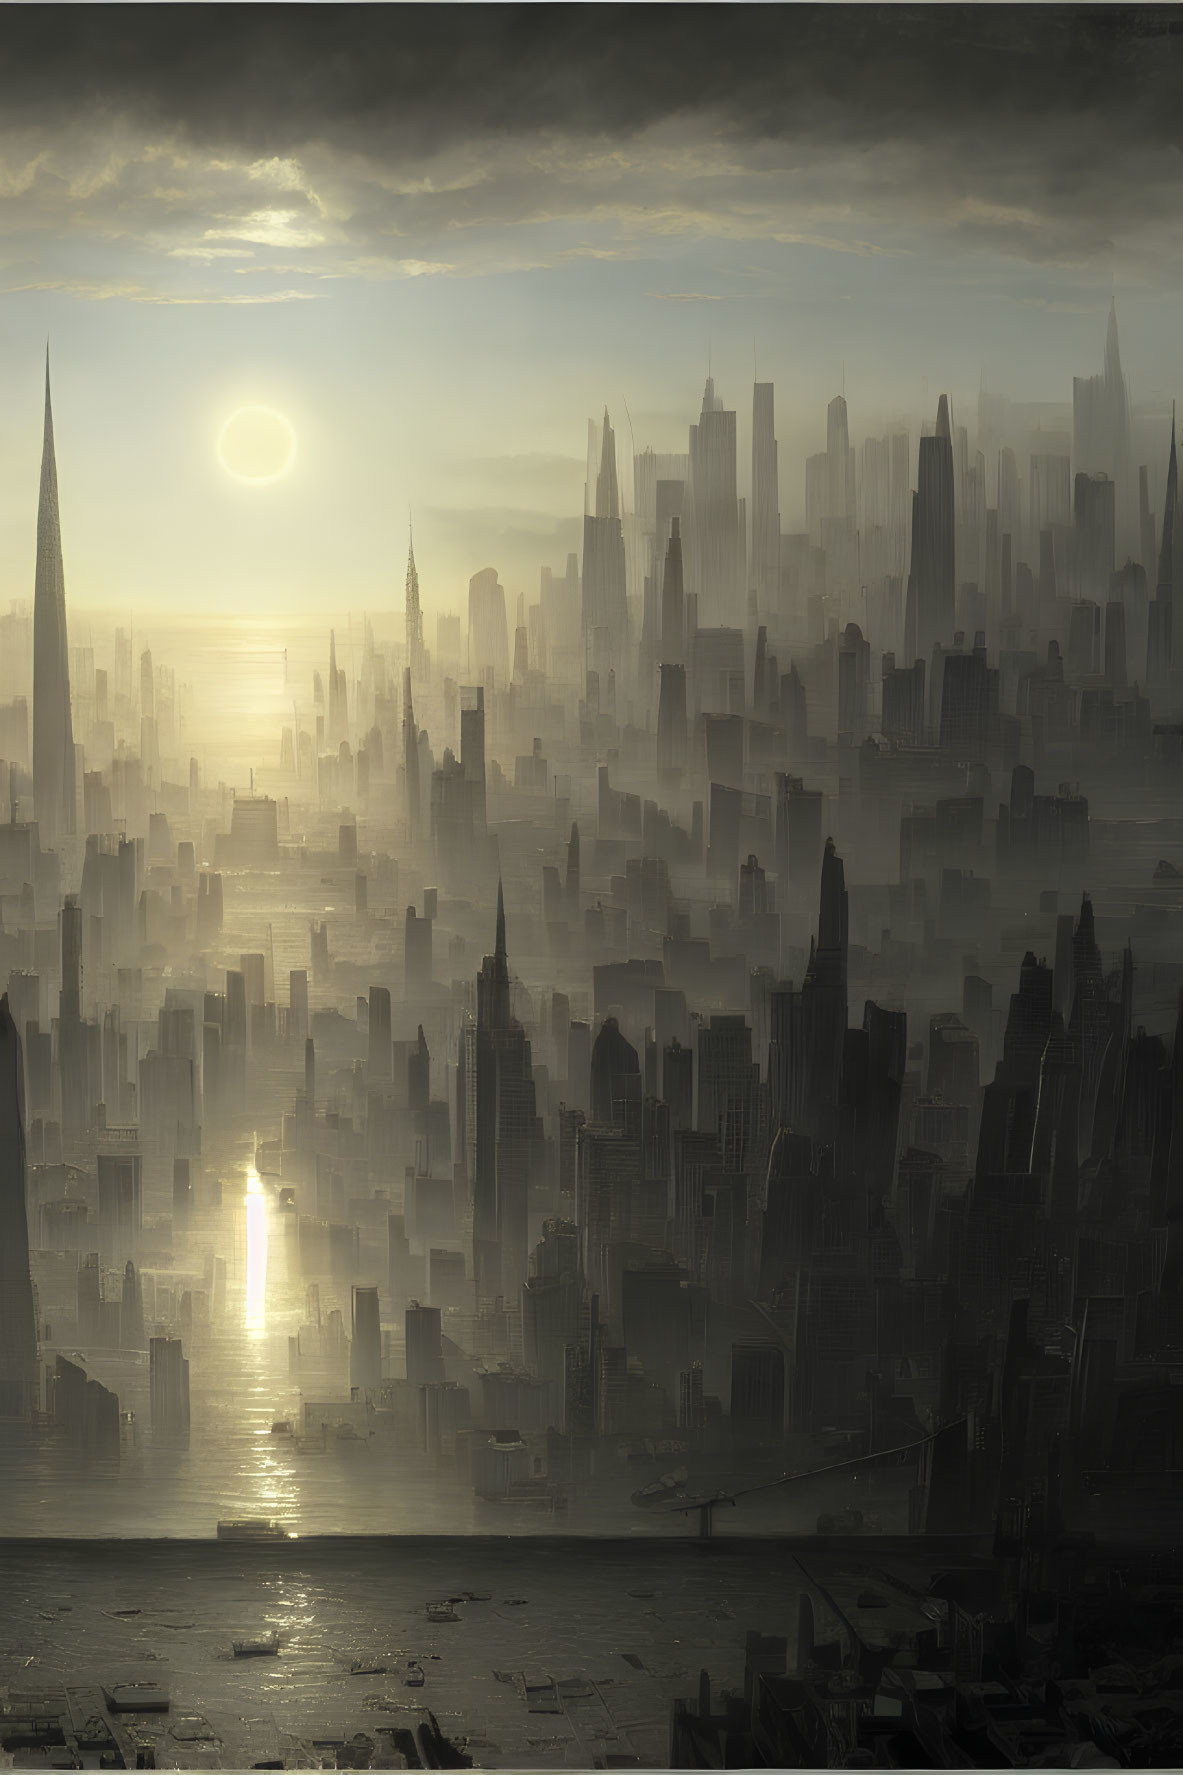 Dystopian cityscape at sunrise with sunbeams and skyscrapers